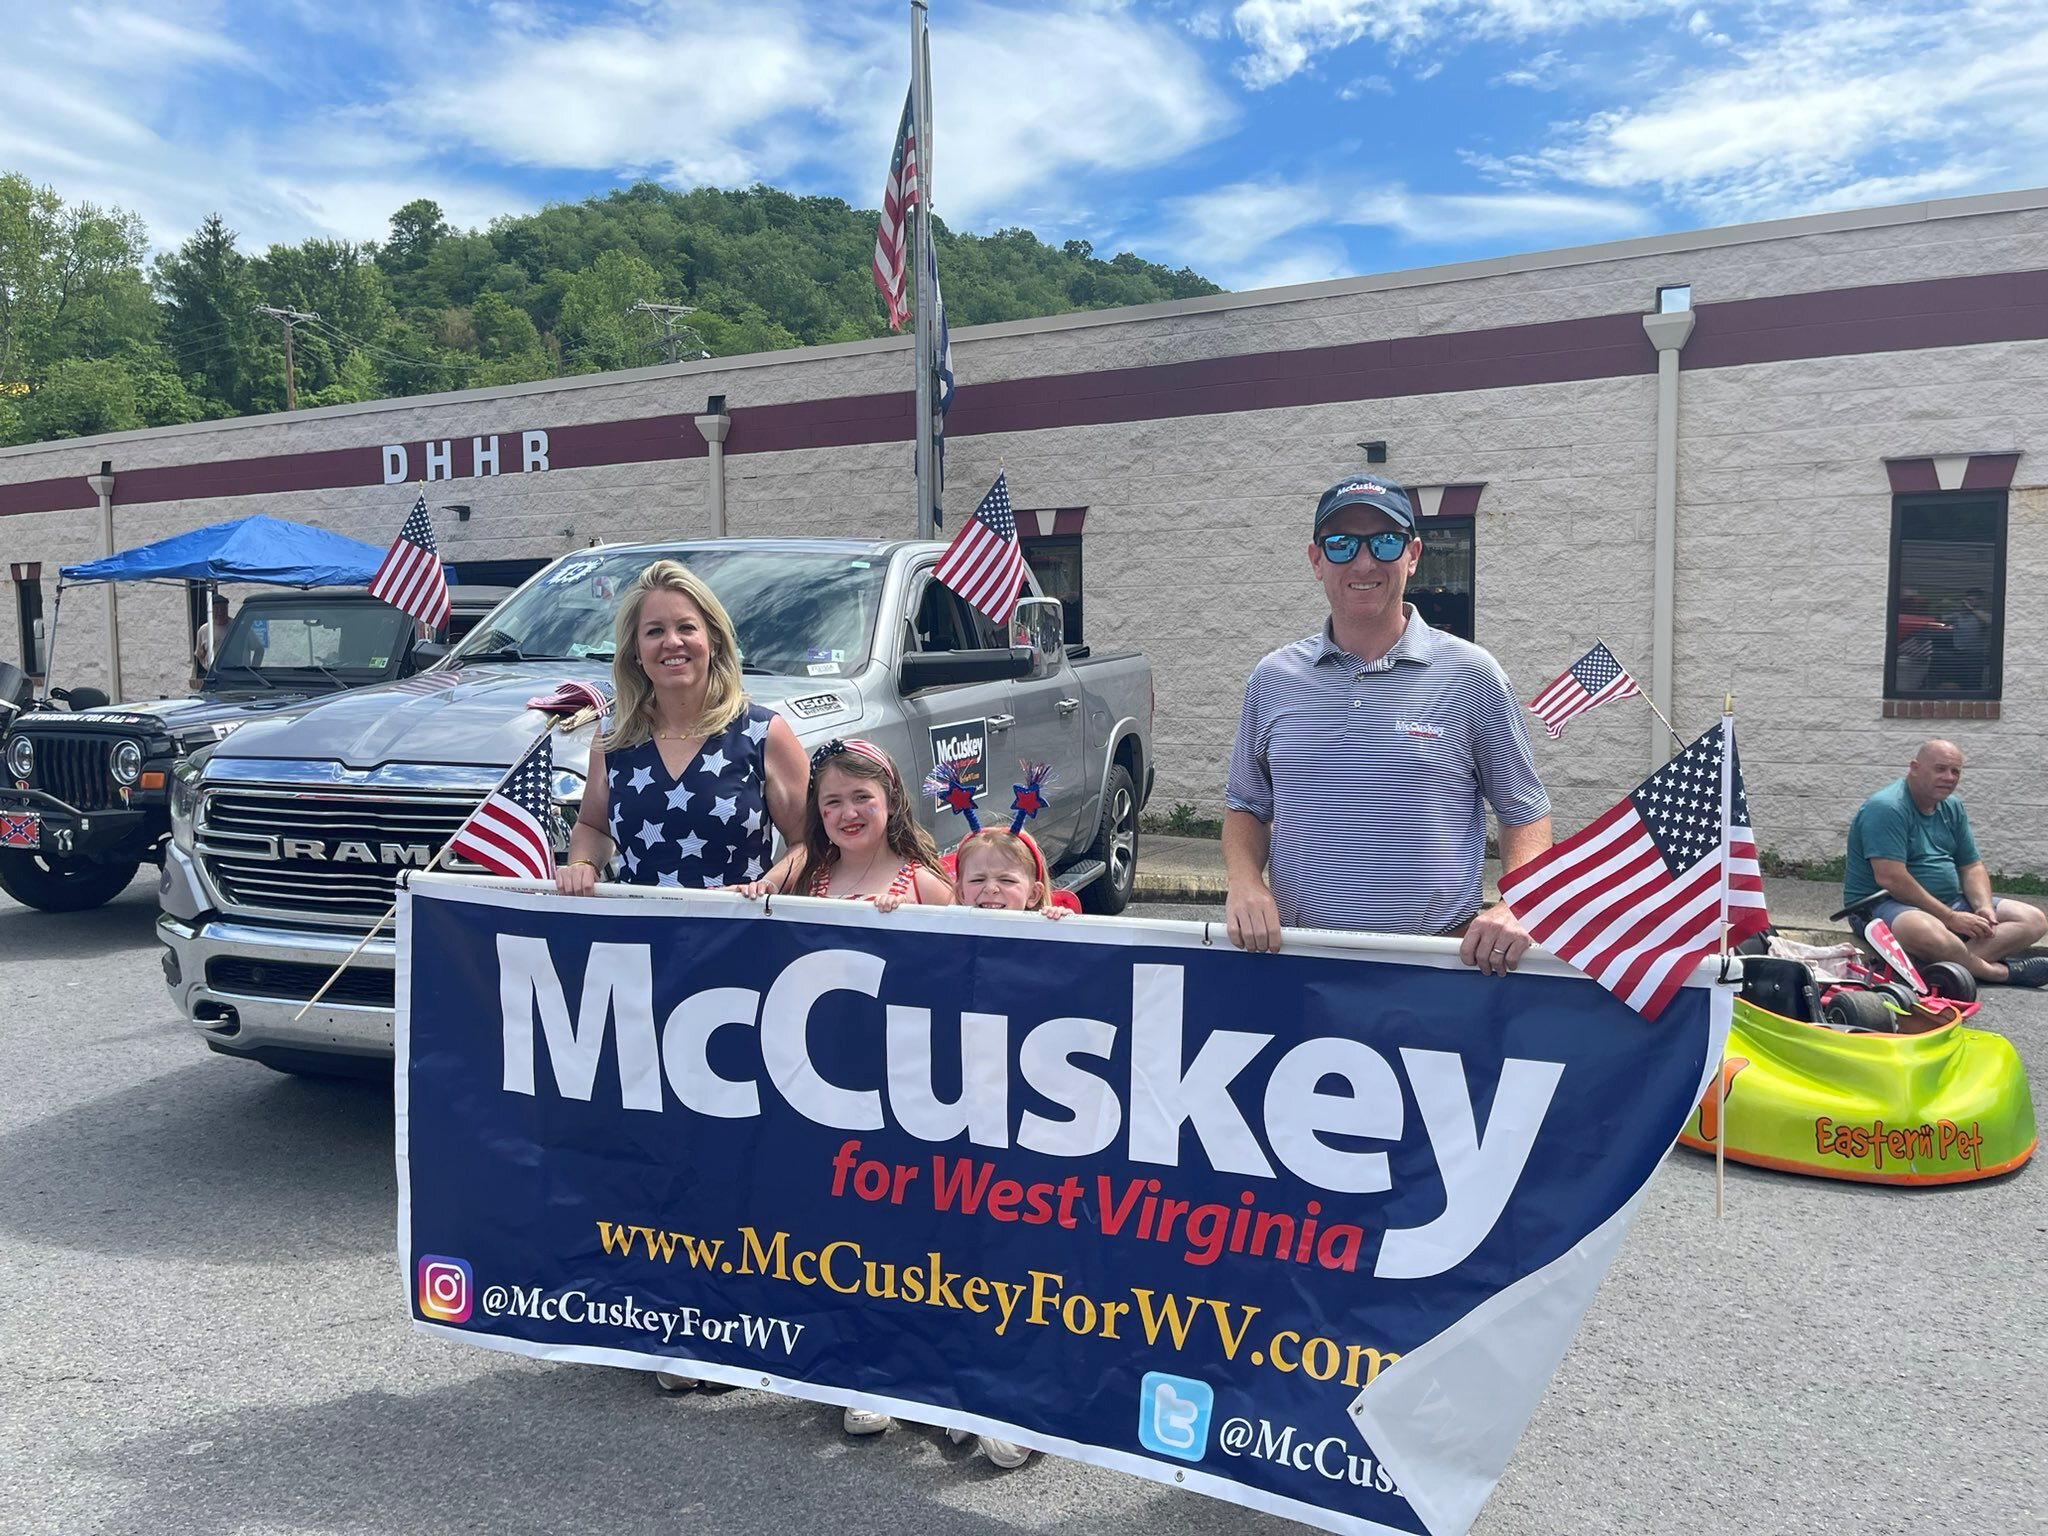 A political candidate standing with his family behind a campaign sign